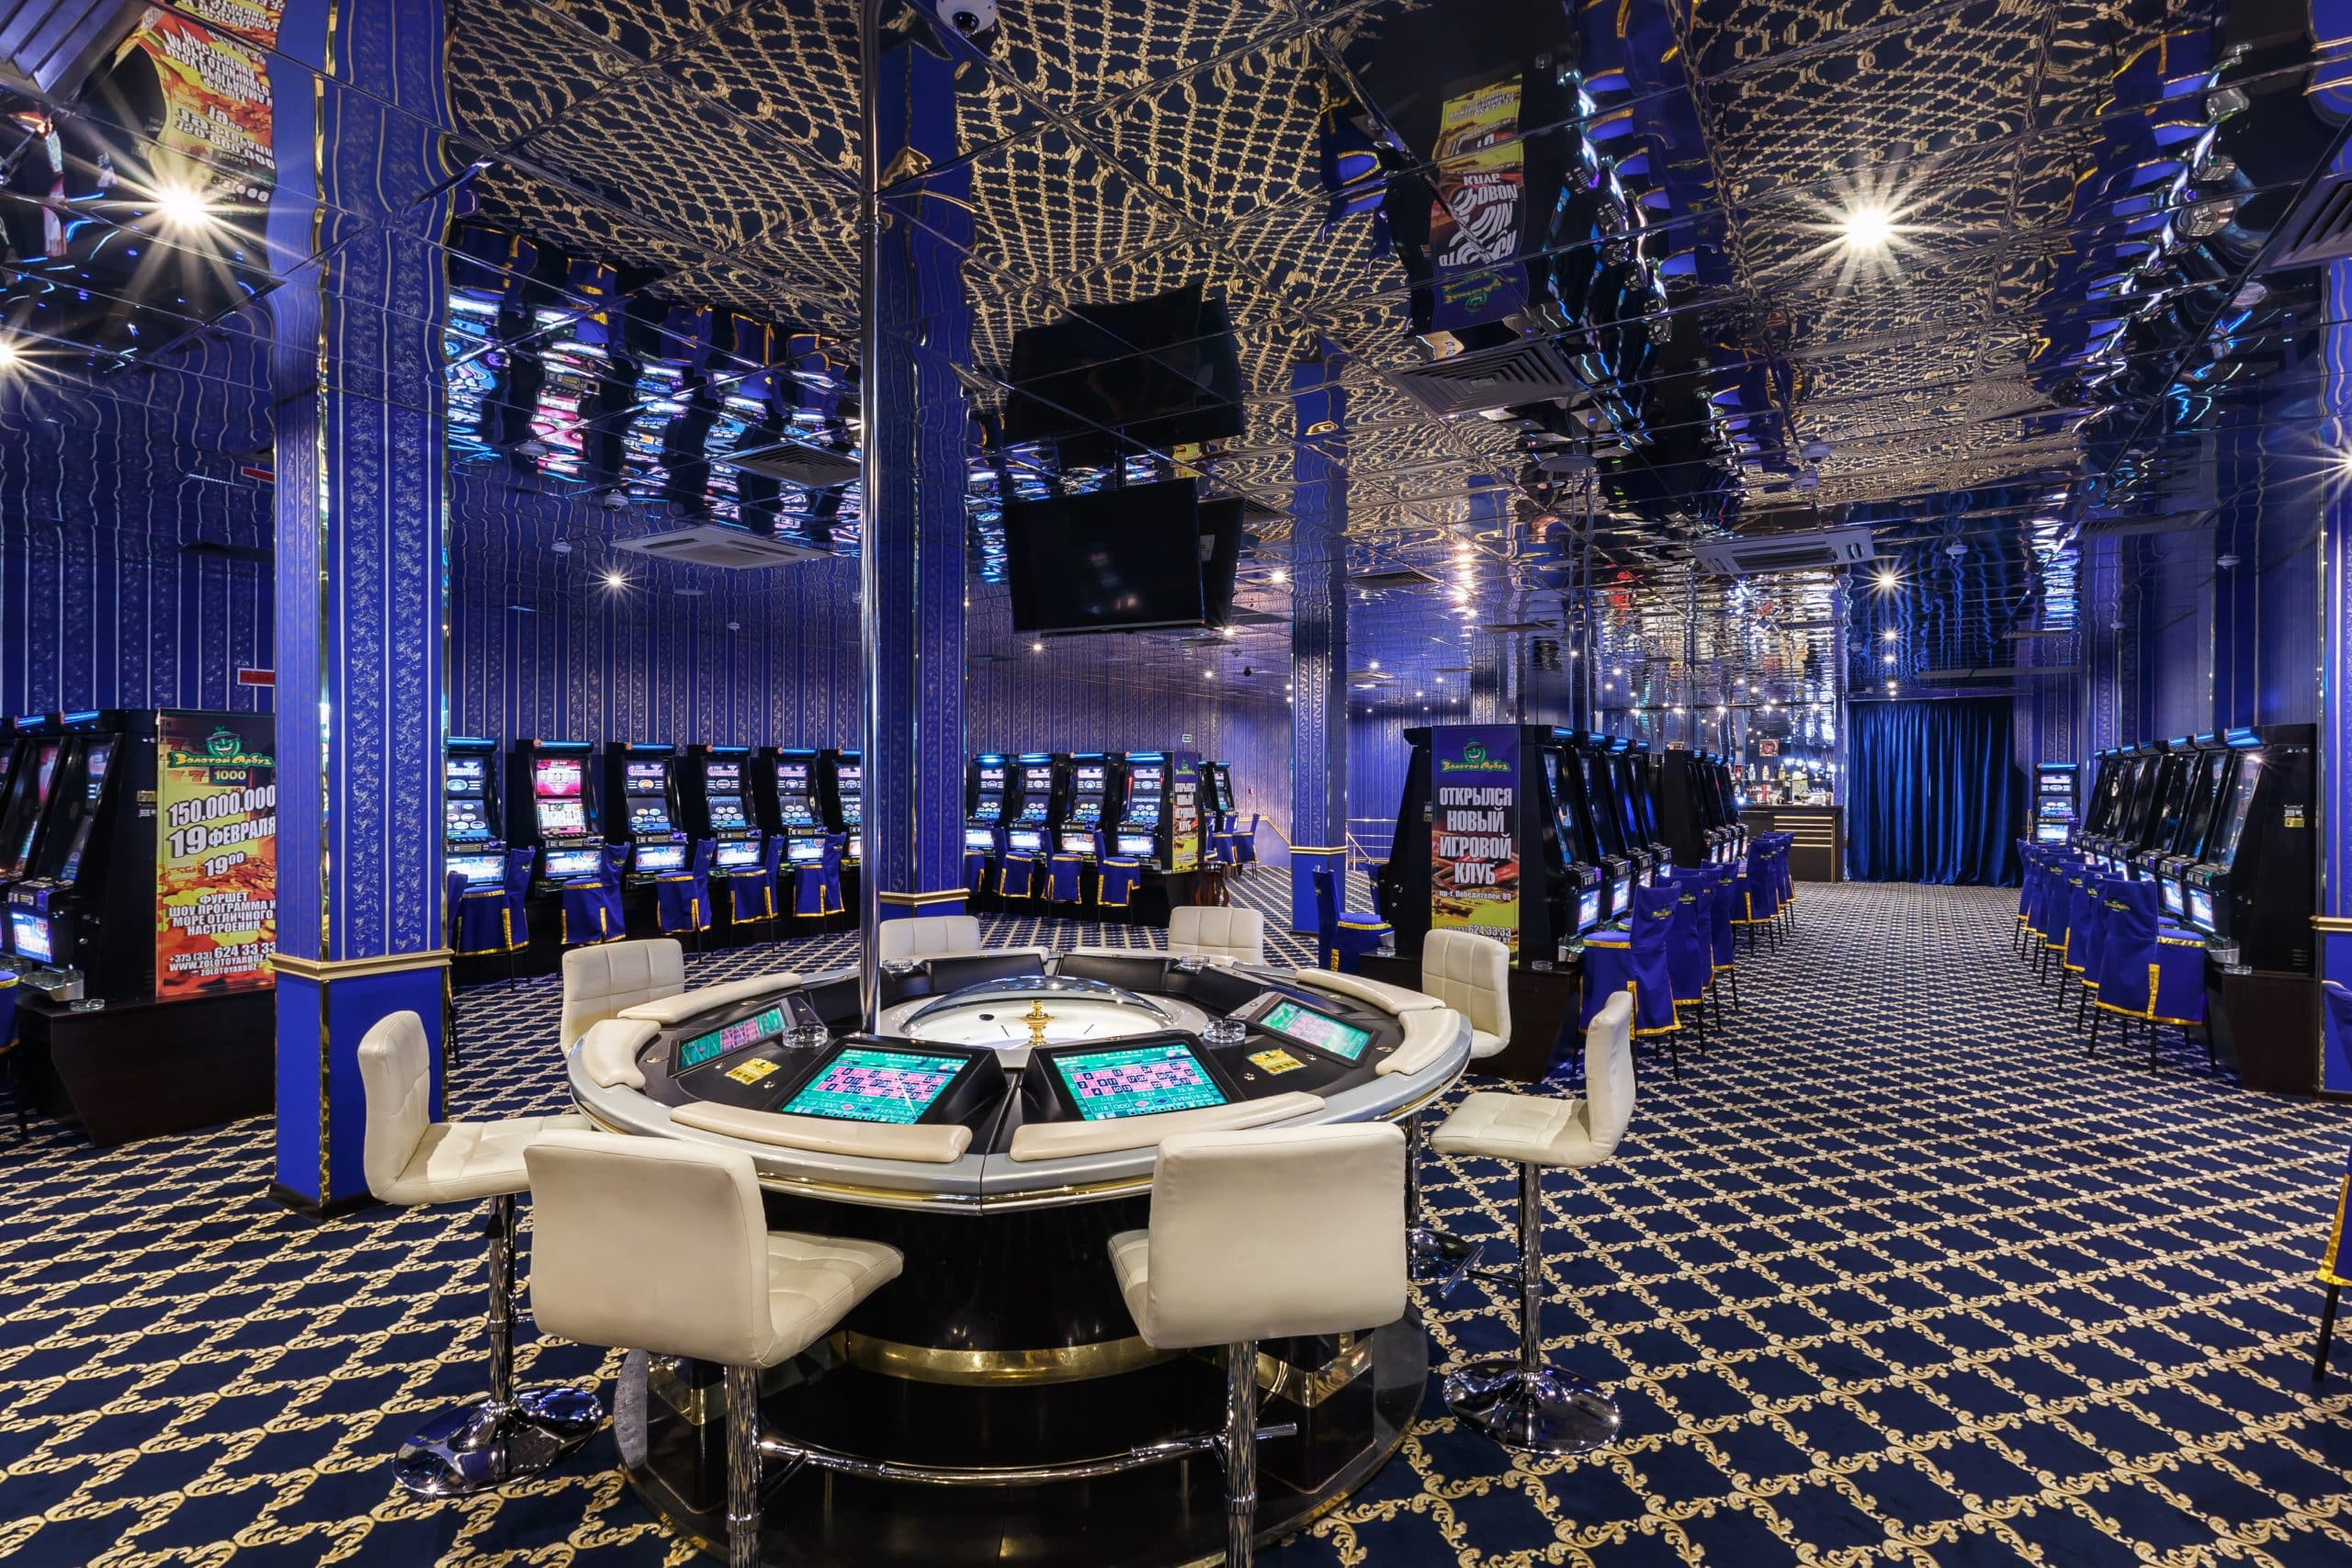 las vegas usa may 2017 interior elite luxury vip casino with rows gambling slots machine classic blue style color scaled